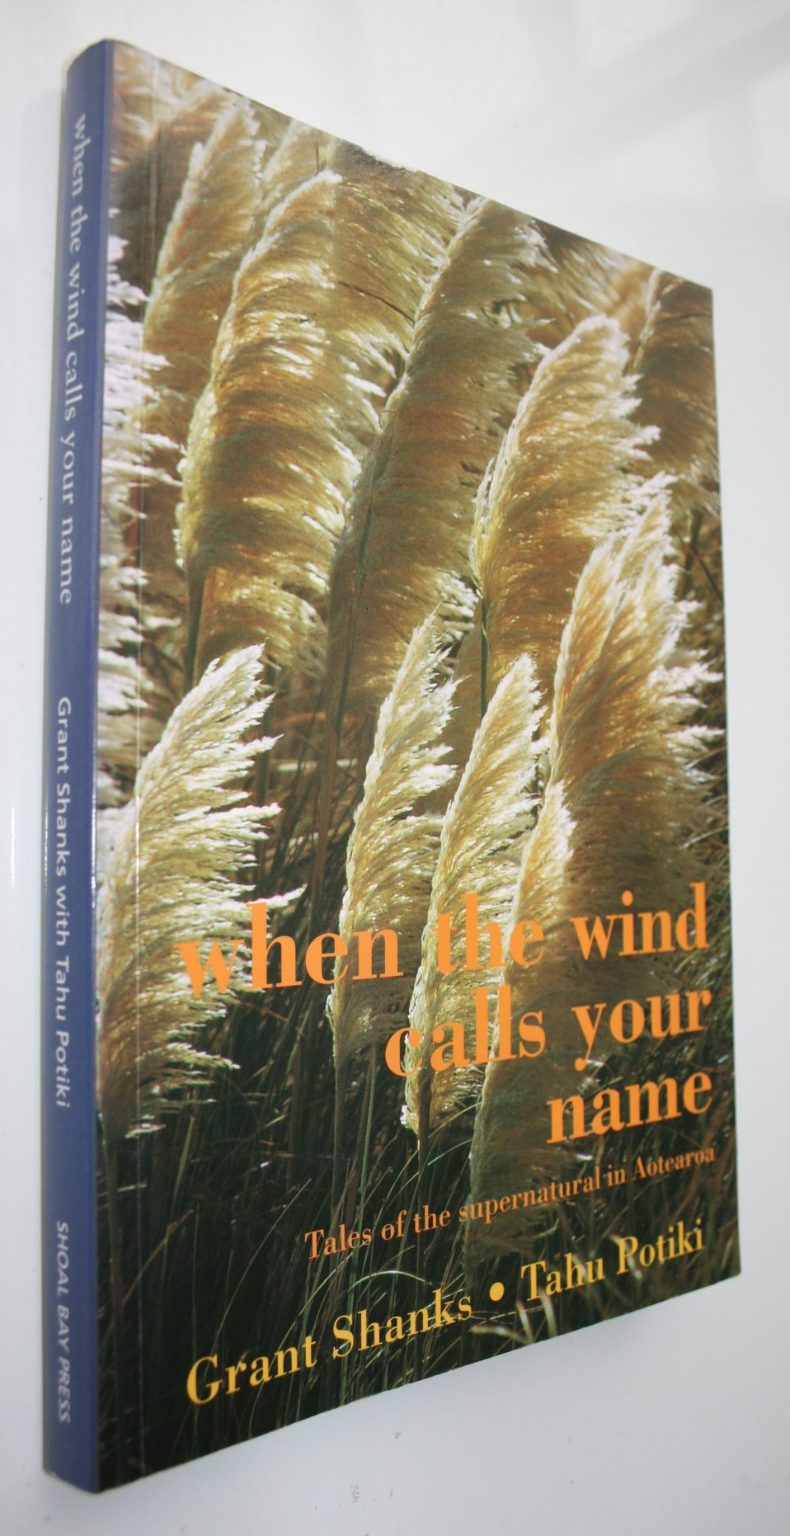 When the Wind Calls Your Name - Tales of the Supernatural in Aotearoa by Grant Shanks; Tahu Potiki. SCARCE